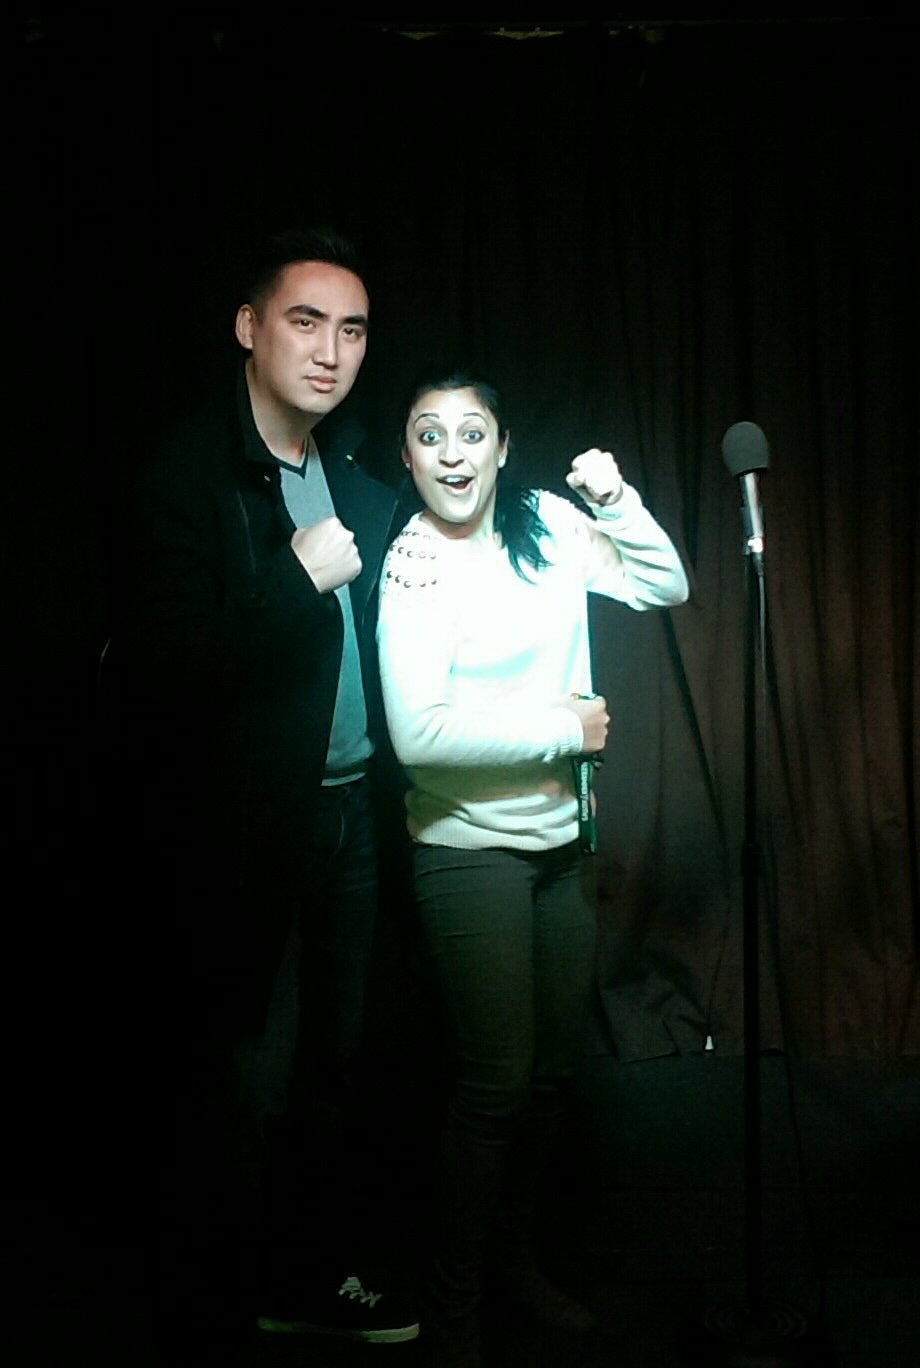  Opening for Aastha Lal on hr first one-woman show. Not a bad way to debut in Toronto 